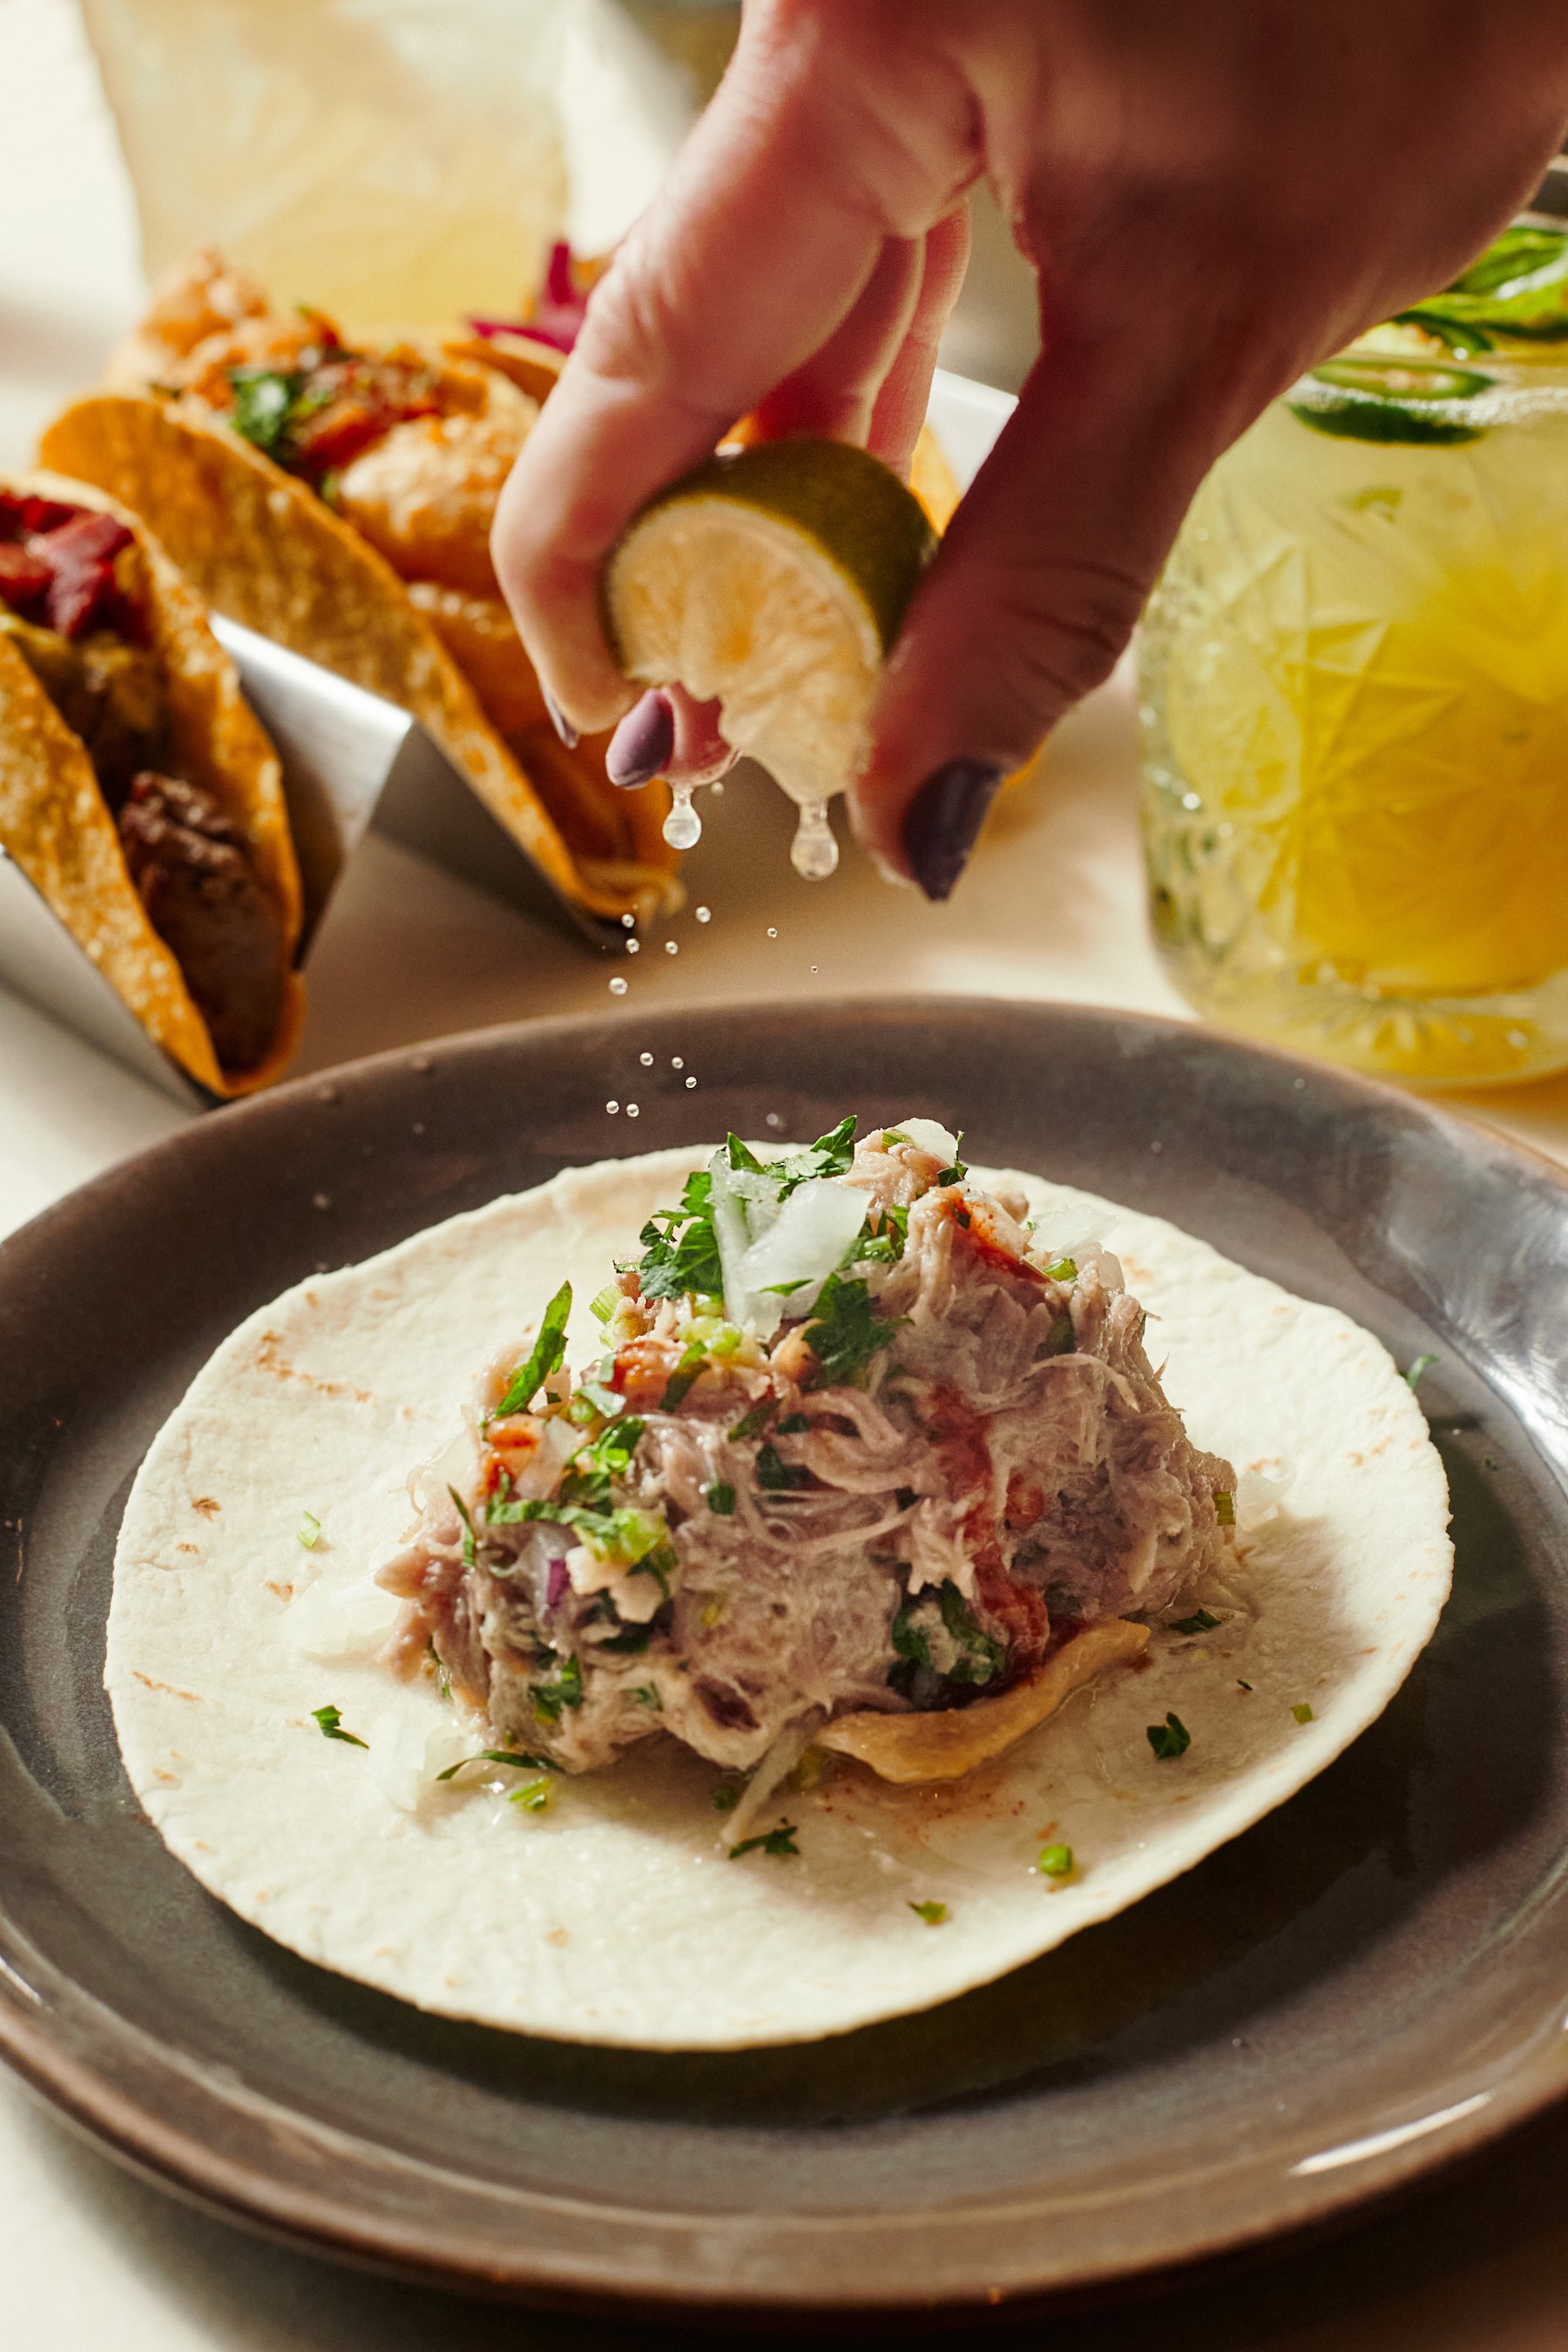 CALI-MEX INTRODUCES NEW MENU FEATURING HEALTHIER CHOICES AND UPDATED  CLASSICS — Stir Public Relations